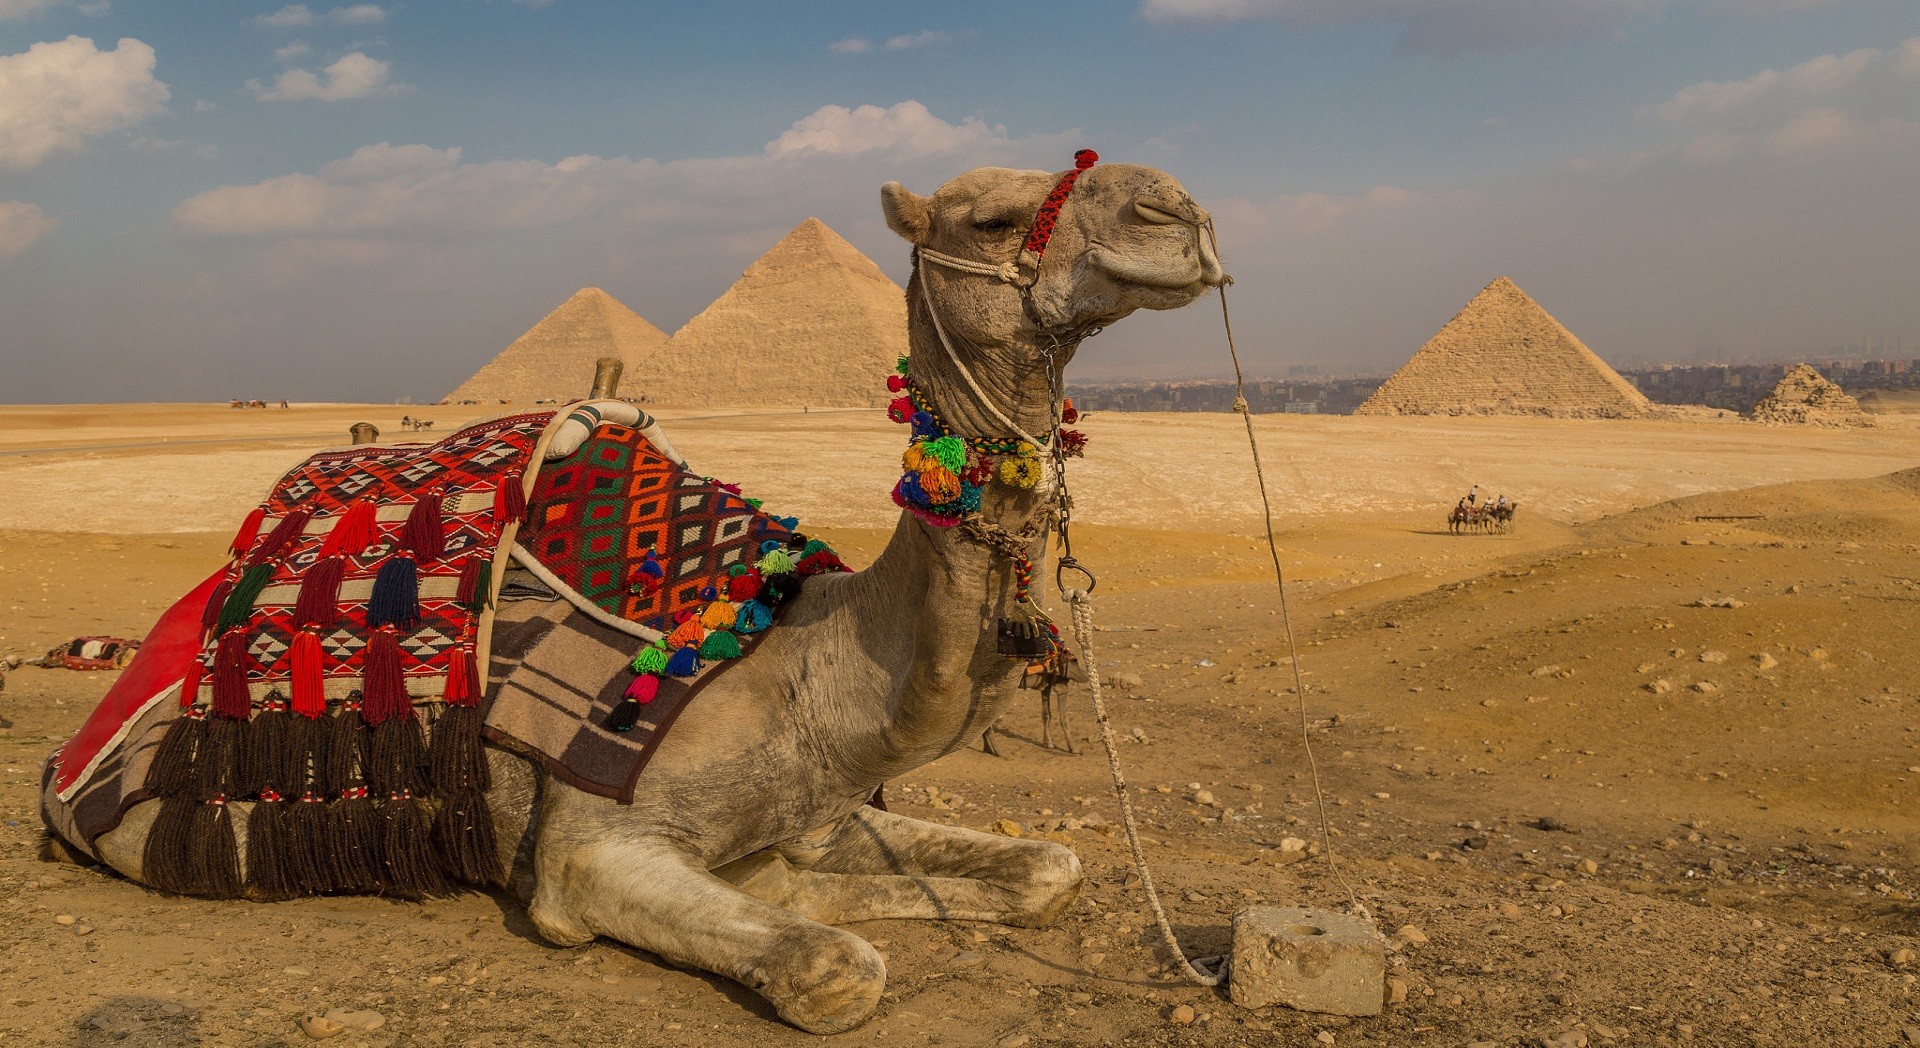 Giza Pyramids and The Egyptian Museum Tour